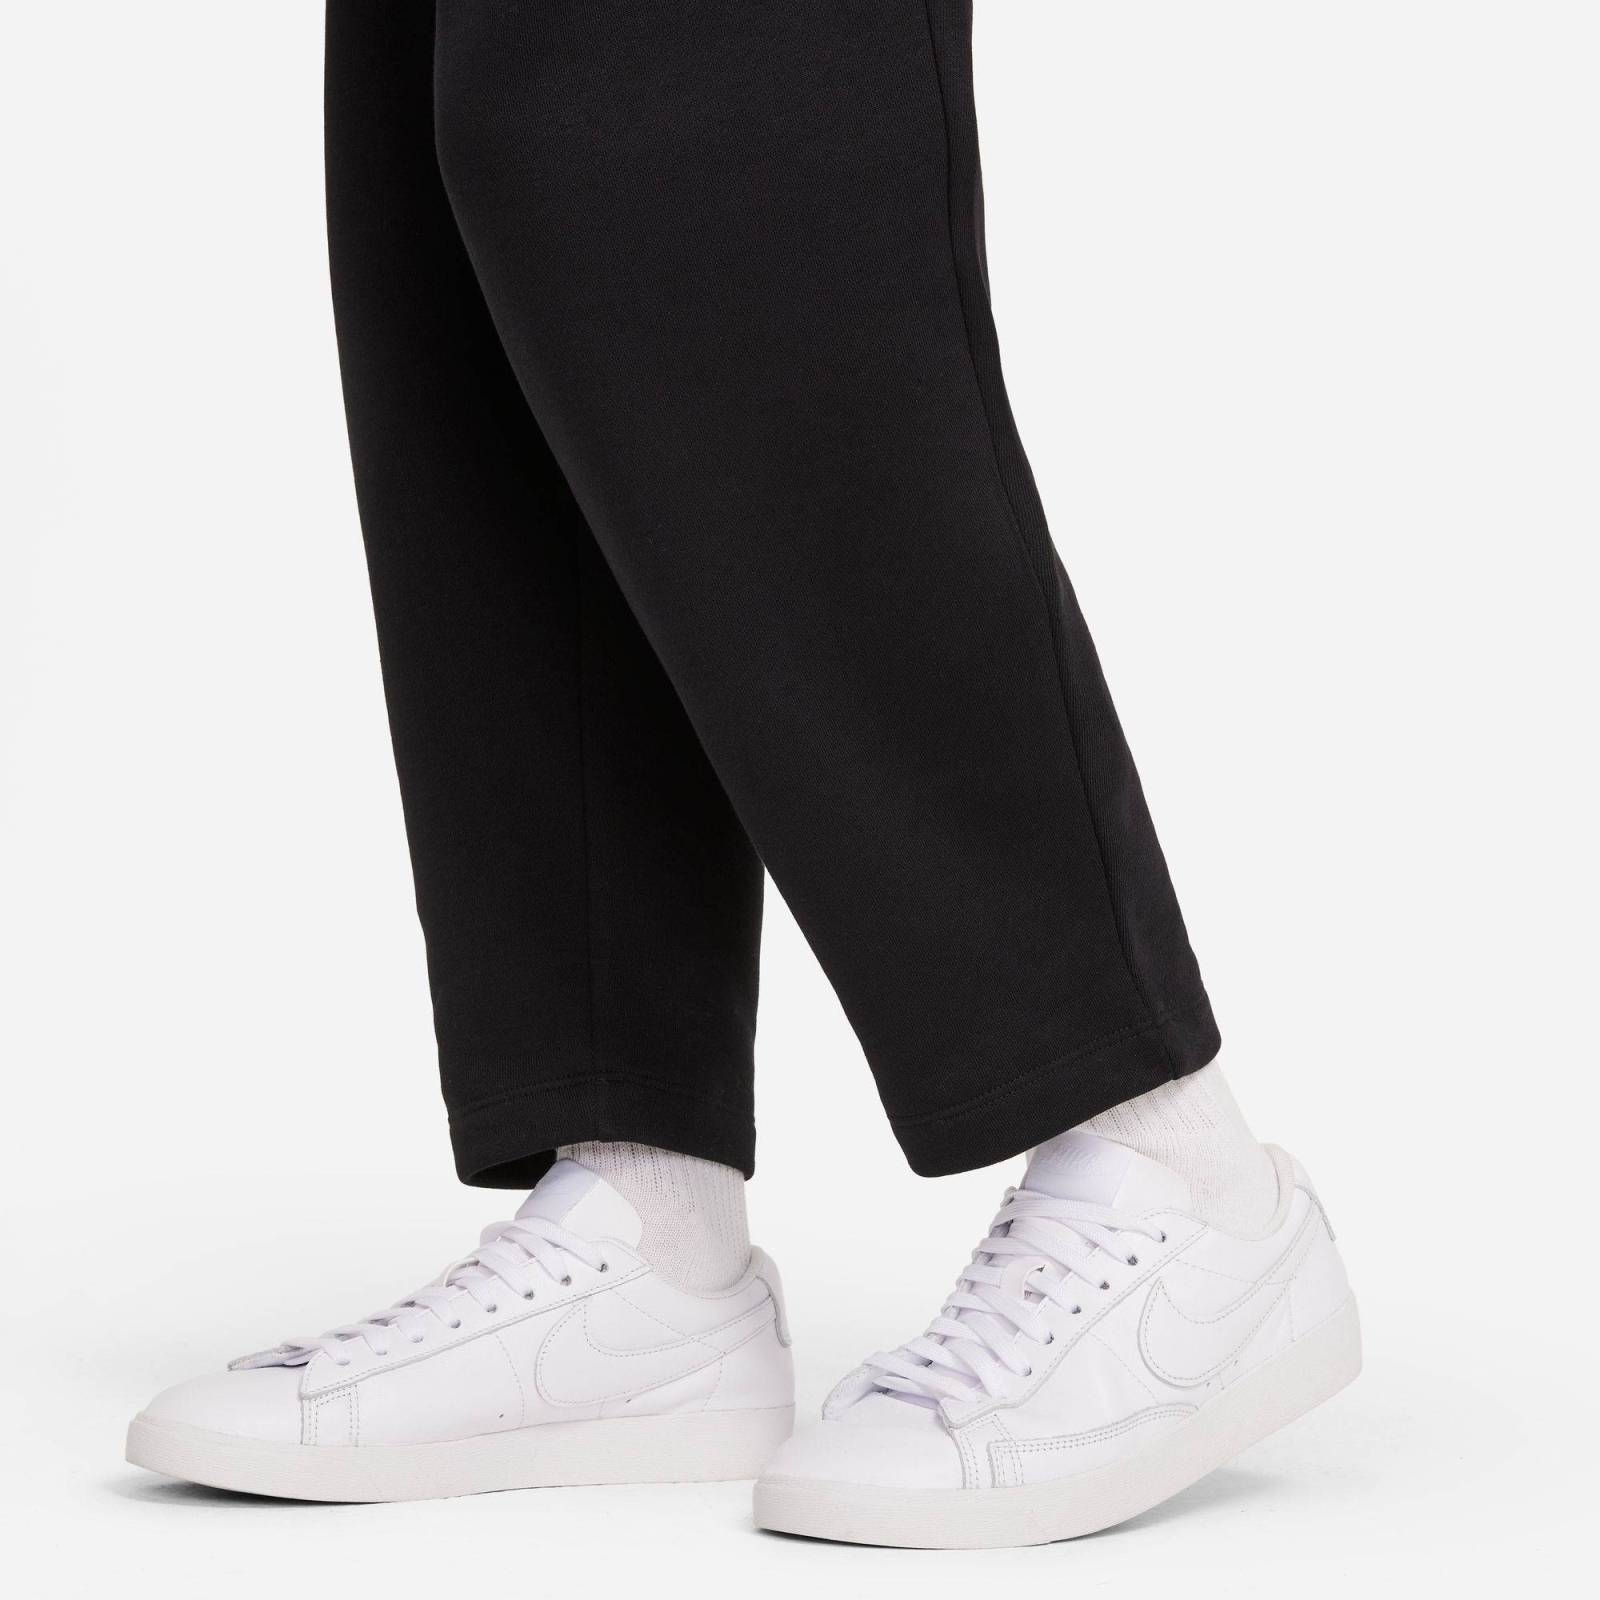 NIKE SPORTSWEAR COLLECTION ESSENTIALS  PANTS